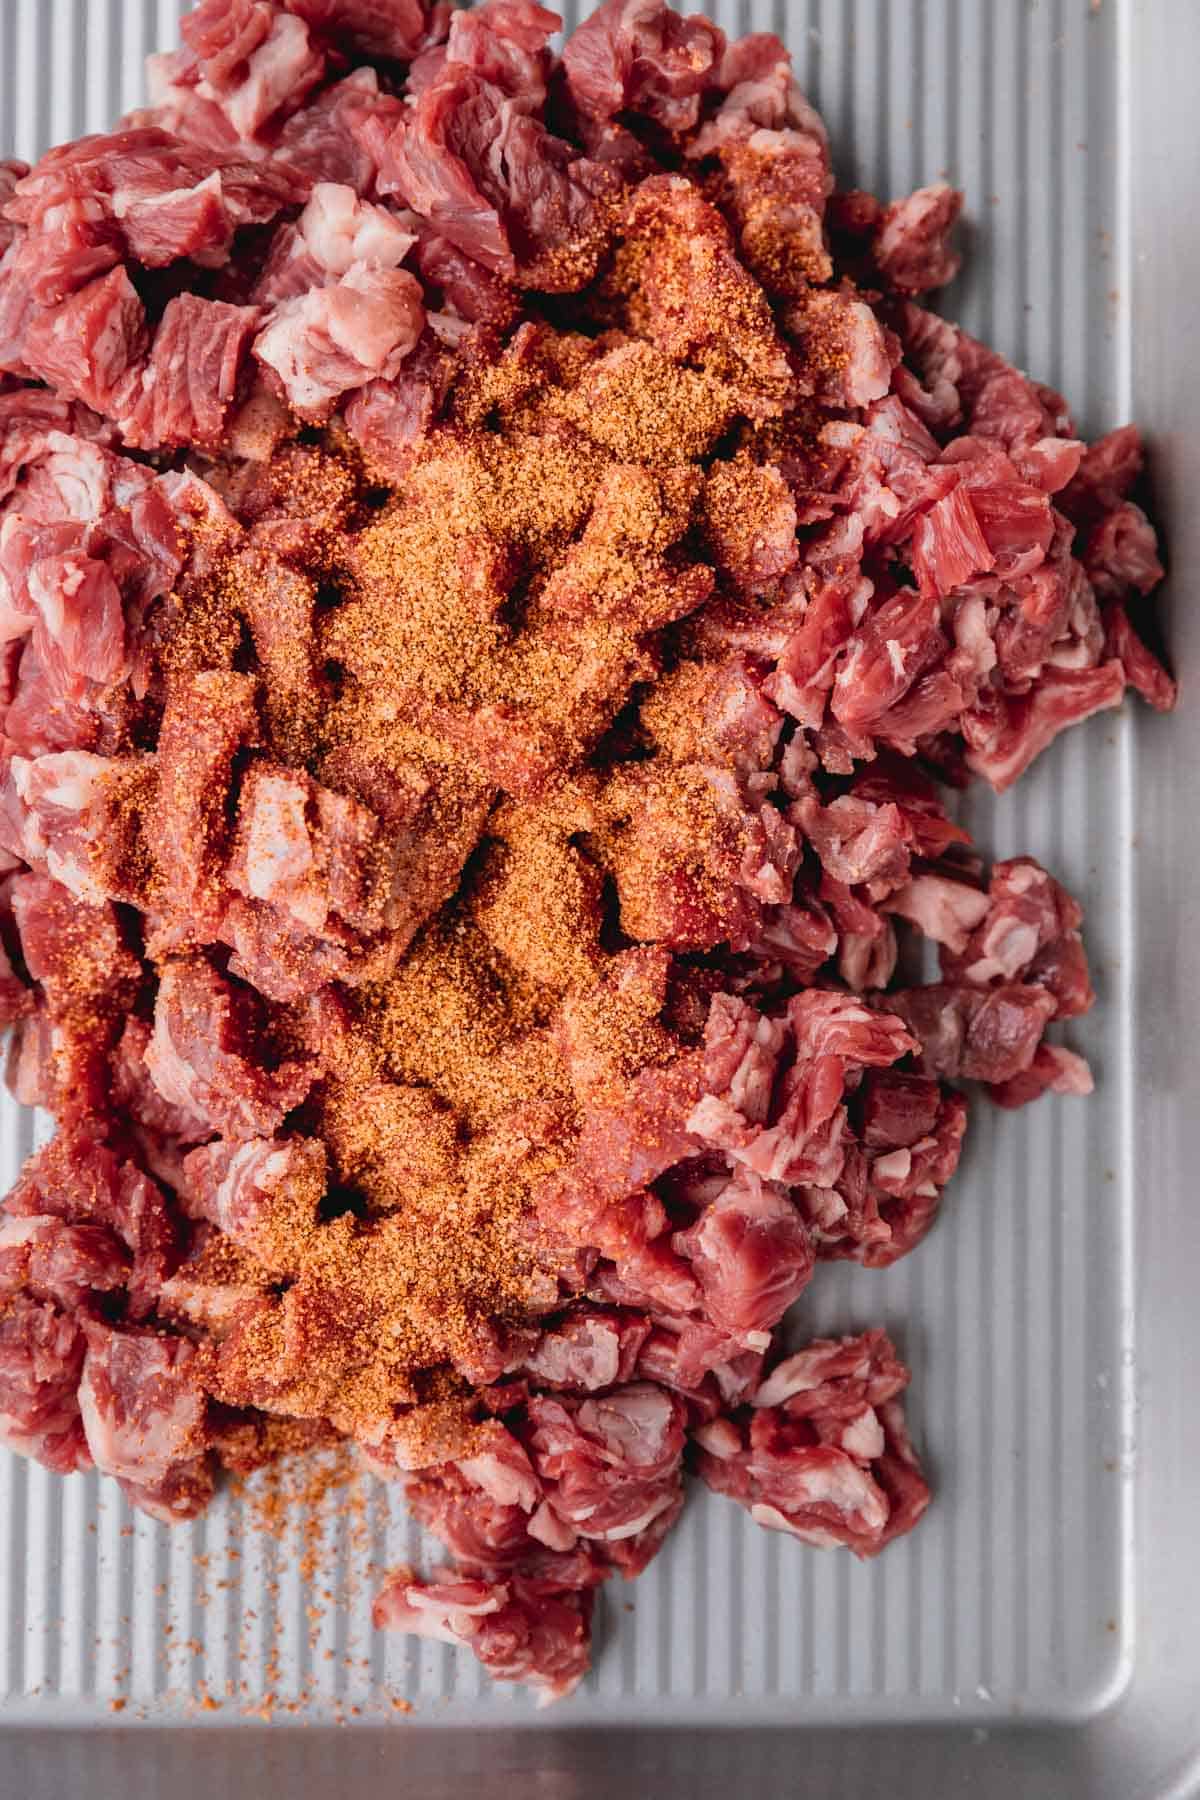 Raw steak cut into cubes with Chef Merito seasoning right before being cooked. 